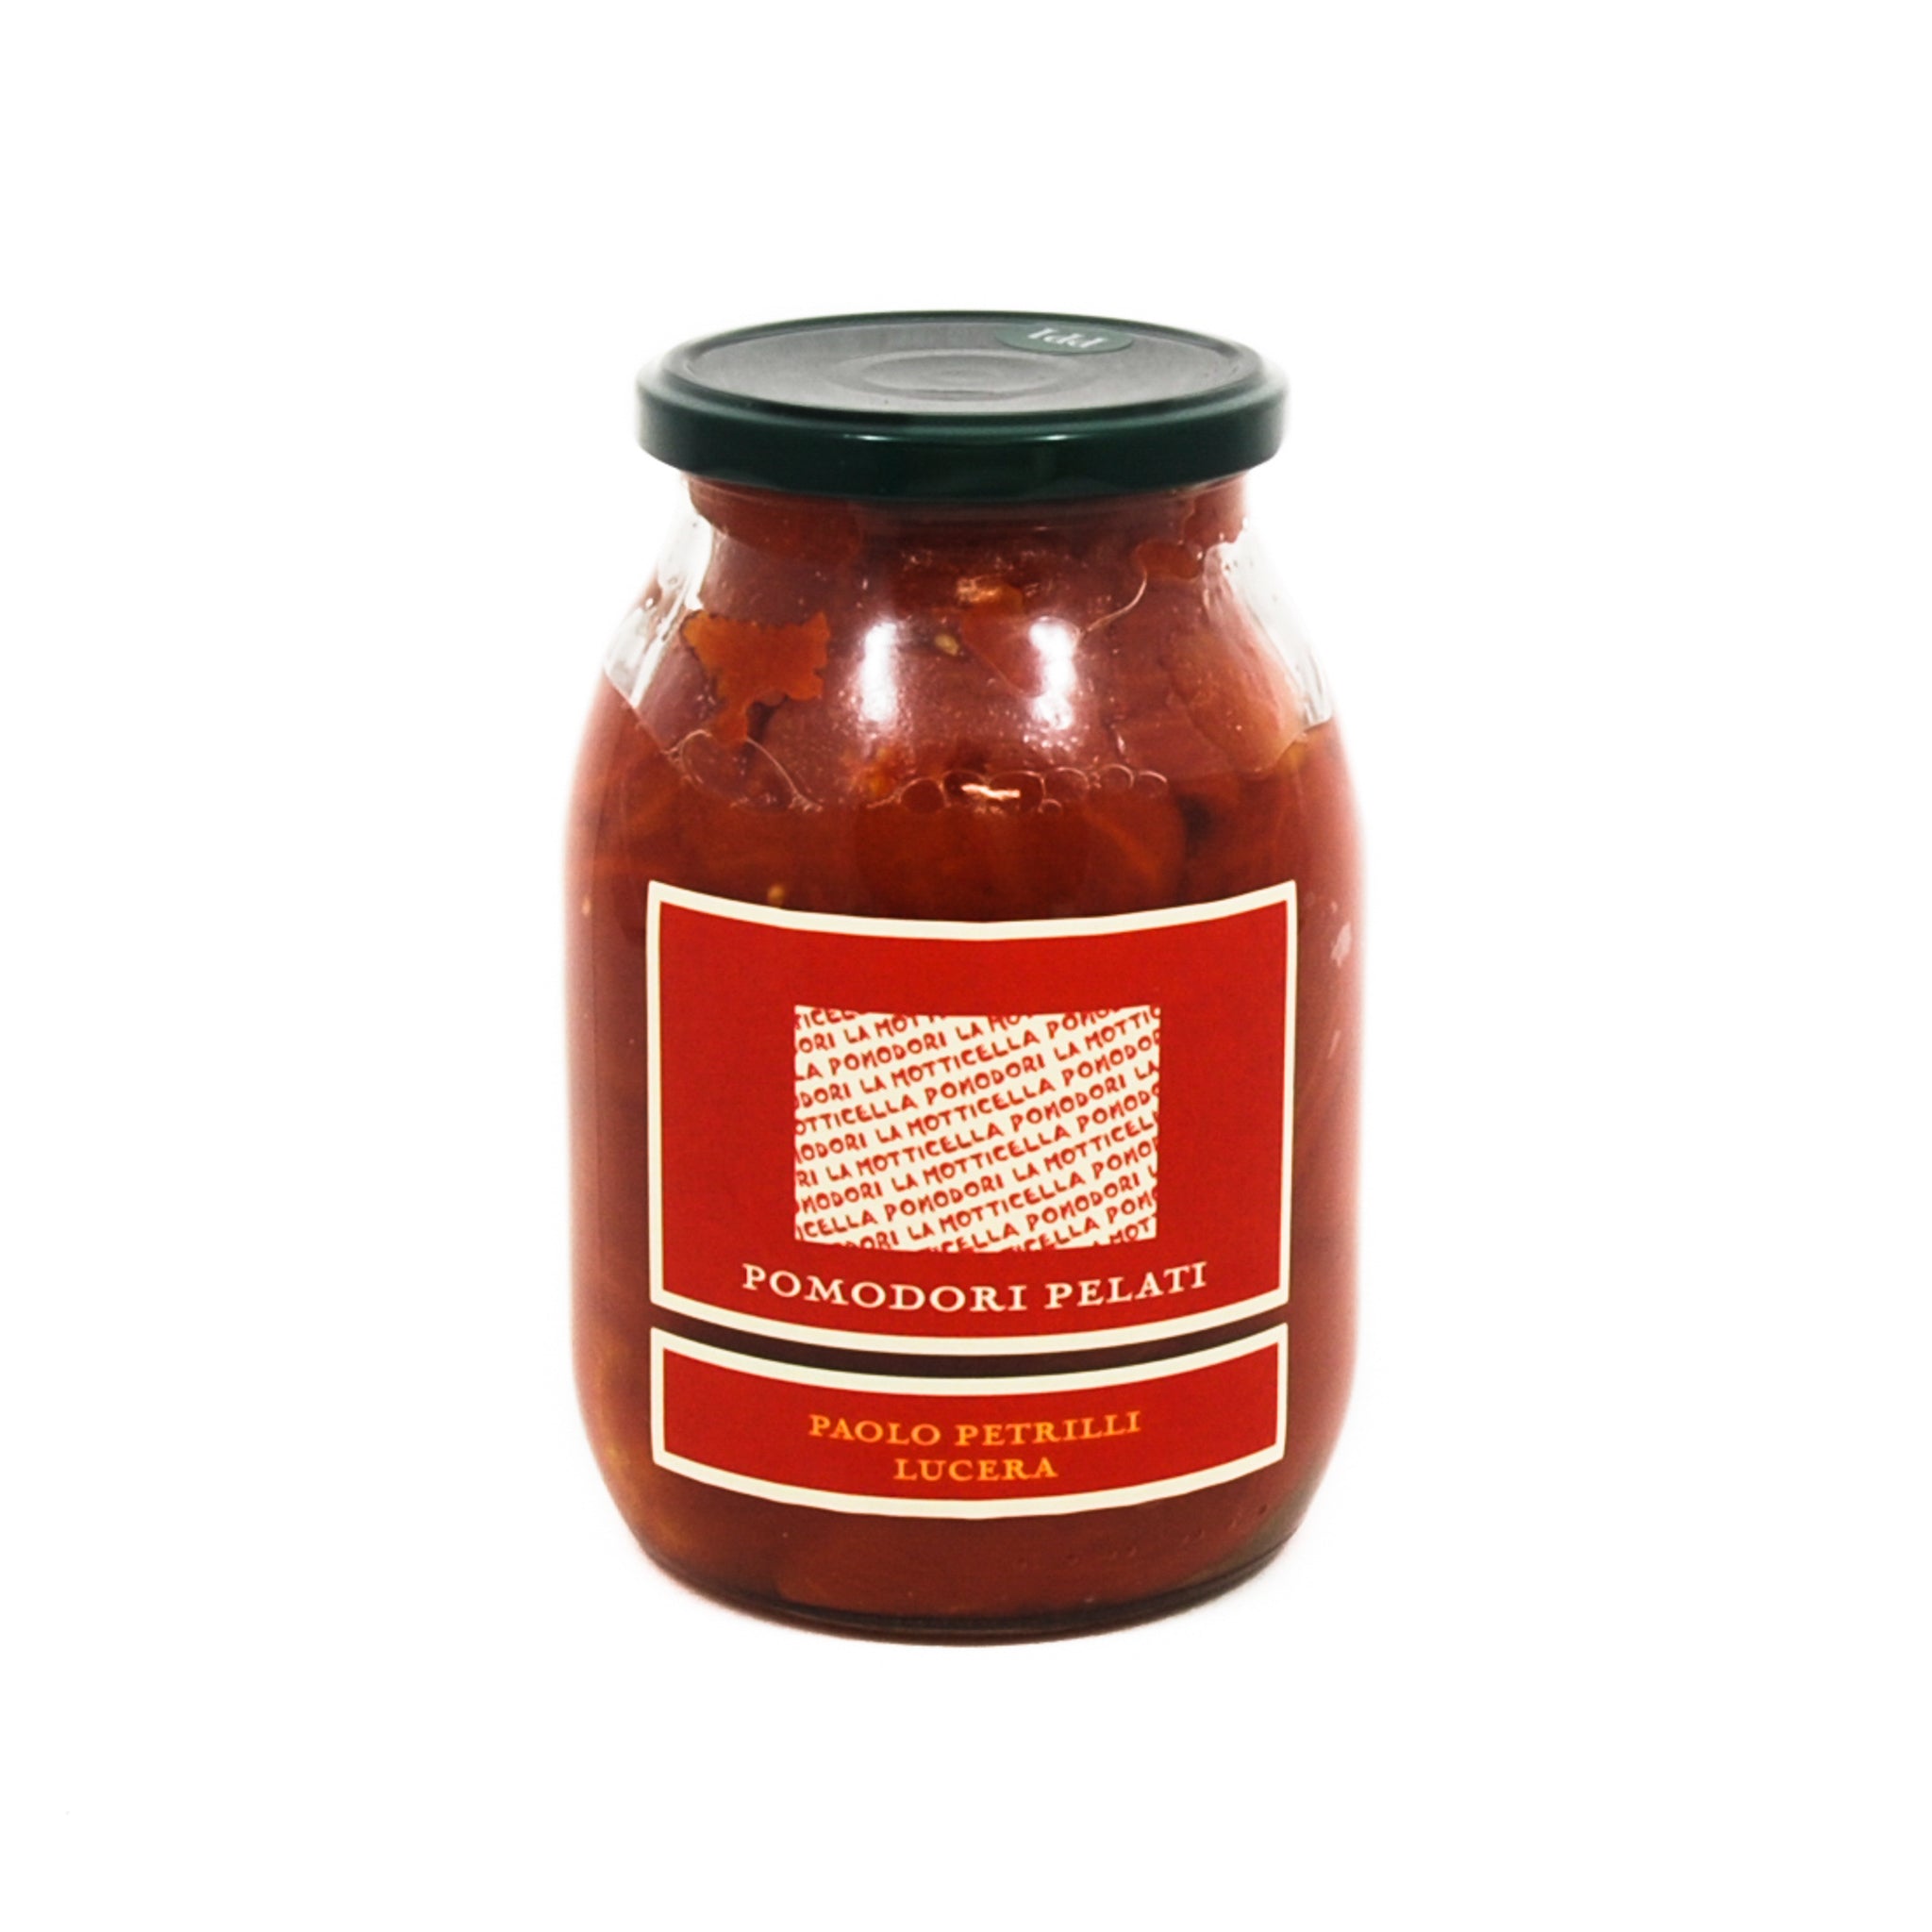 Paolo Petrilli Organic Peeled Tomatoes 1062ml Ingredients Pickled & Preserved Vegetables Italian Food